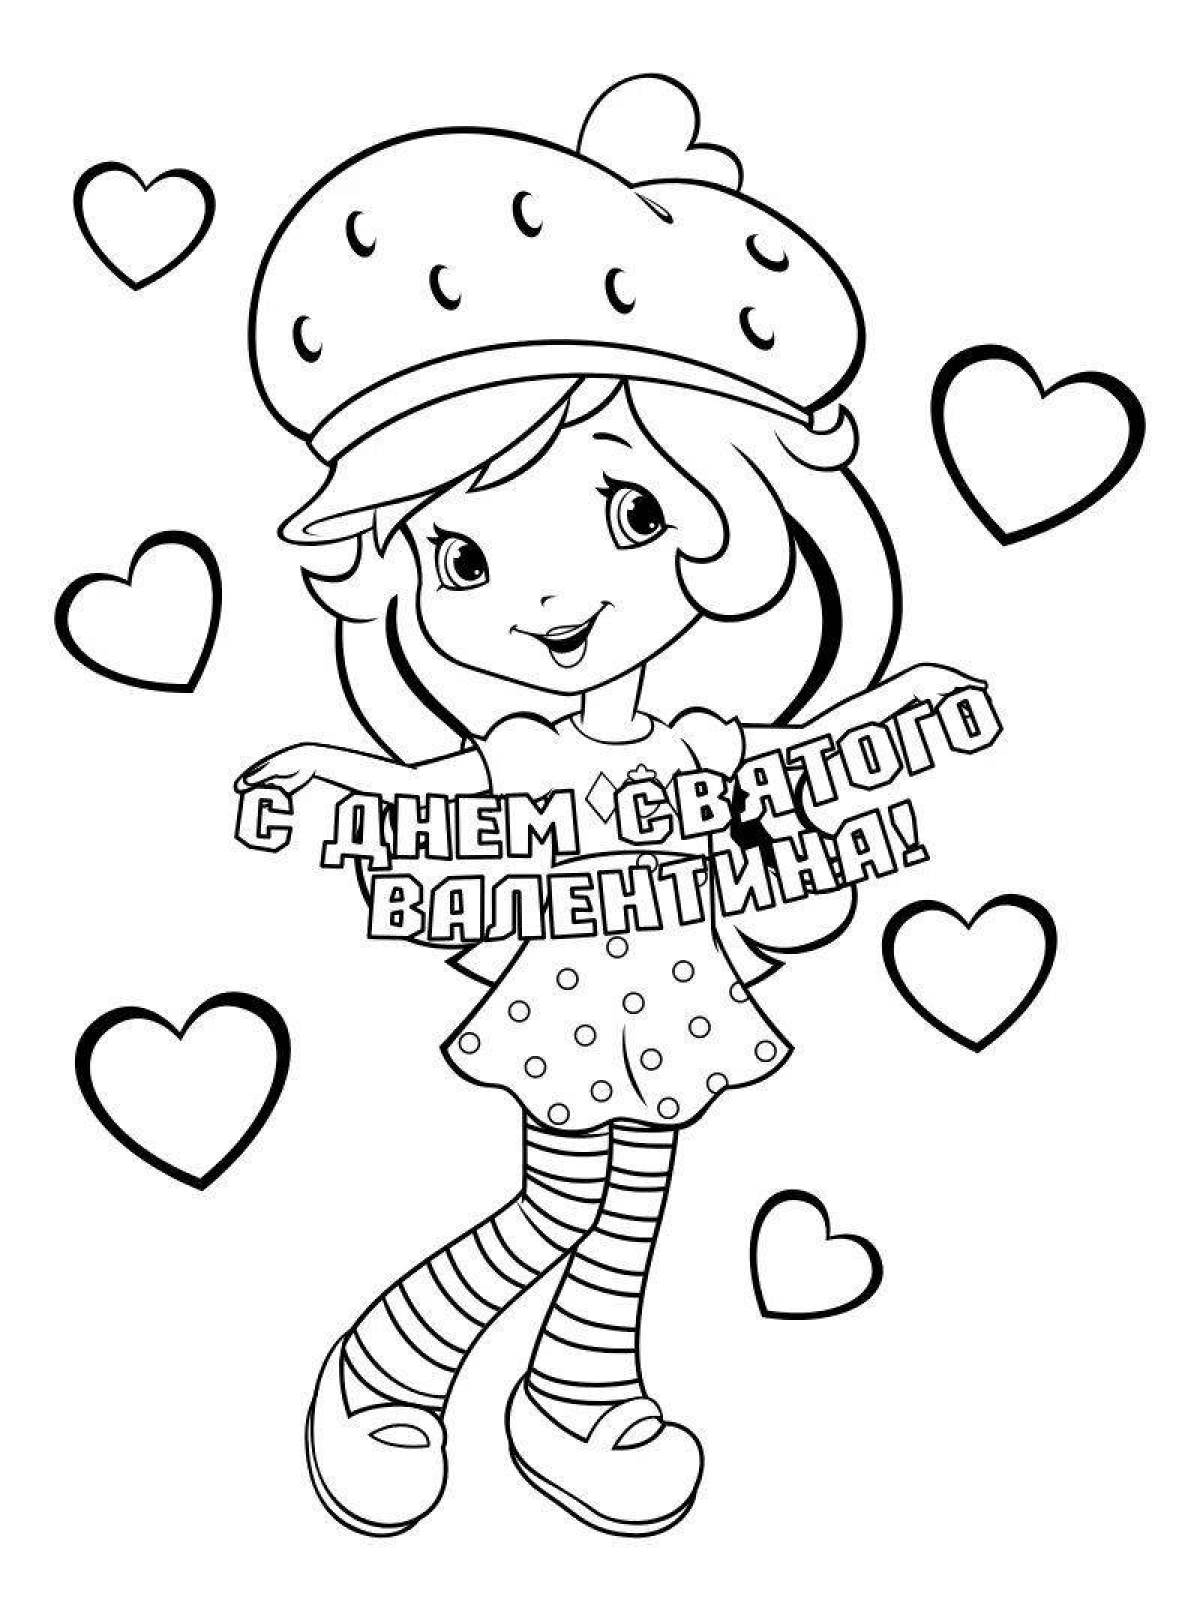 Lovely valentine's coloring book for February 14th